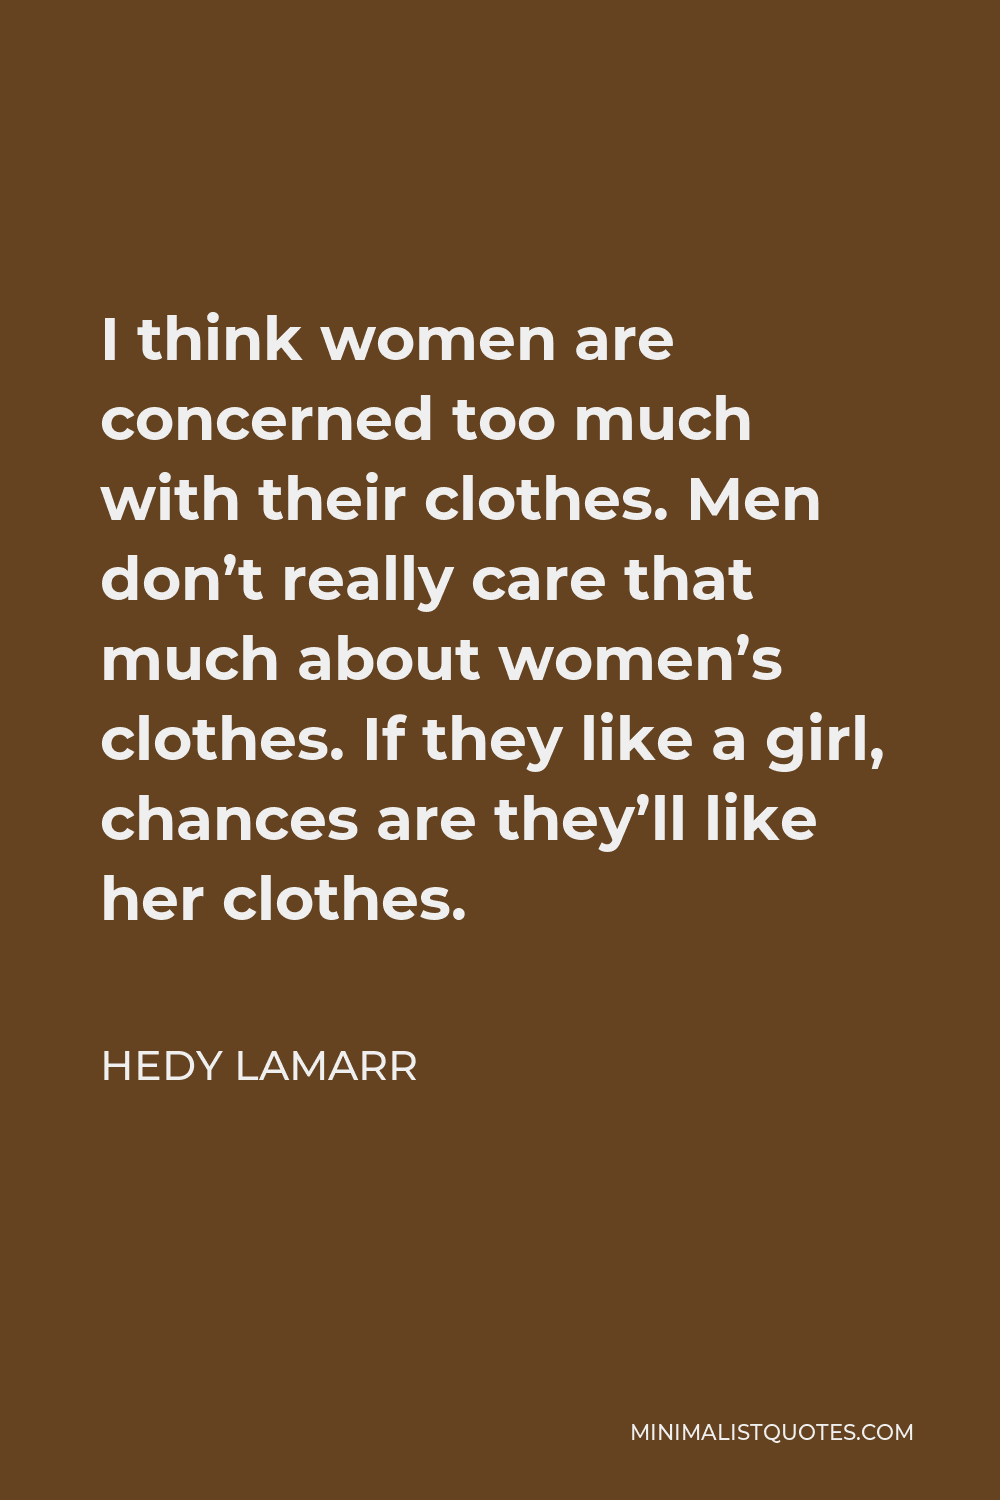 Hedy Lamarr Quote - I think women are concerned too much with their clothes. Men don’t really care that much about women’s clothes. If they like a girl, chances are they’ll like her clothes.